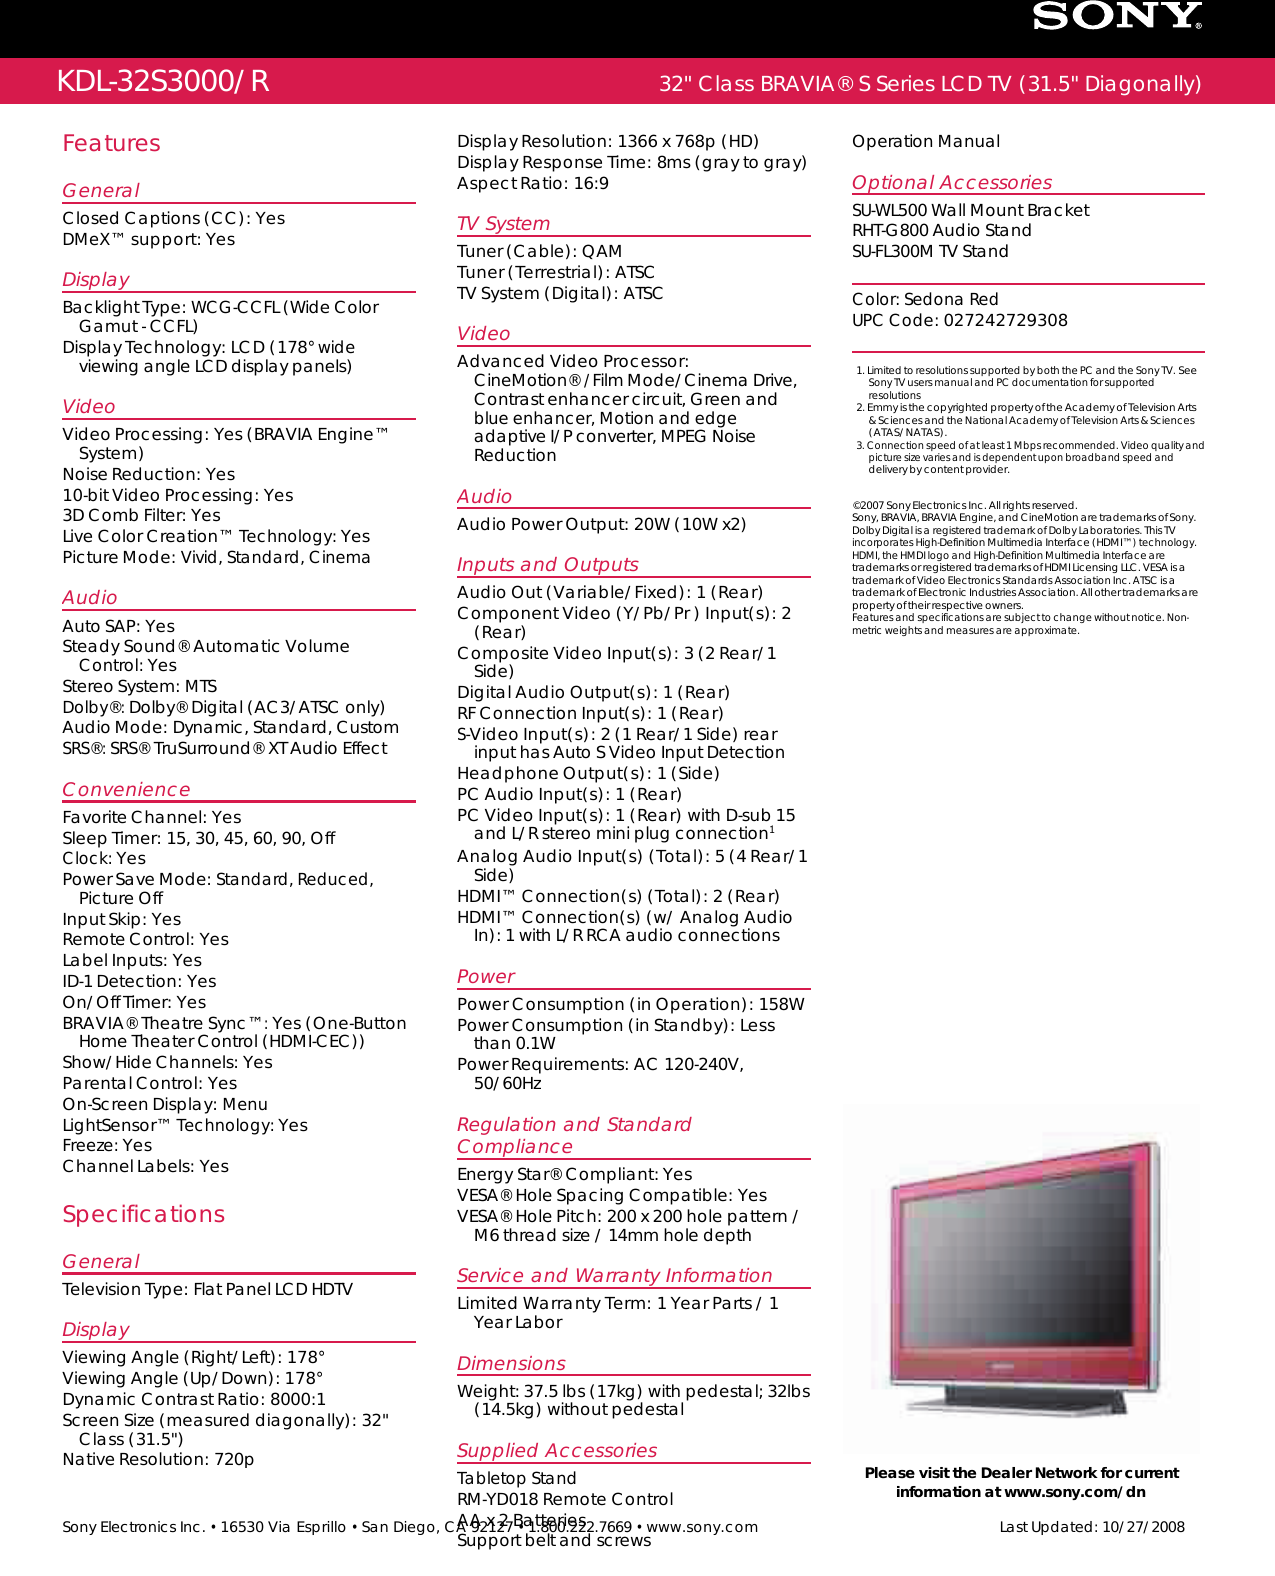 Page 2 of 2 - Sony KDL-32S3000 User Manual Marketing Specifications (Red ) KDL32S3000R Mksp